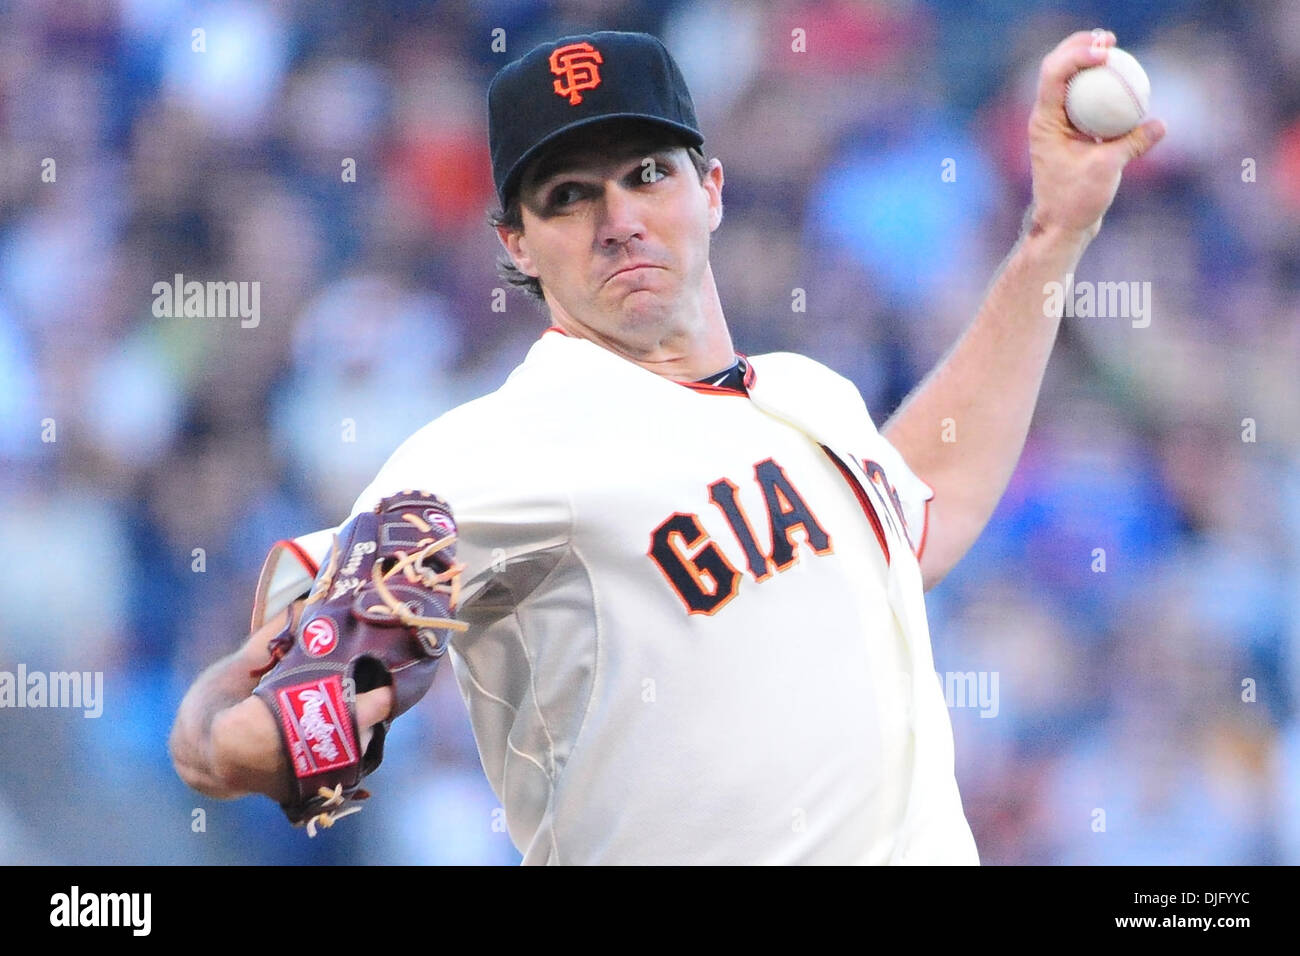 San Francisco, CA: San Francisco Giants pitcher Barry Zito (75) pitches the ball. The Los Angeles Dodgers won the game 4-2. (Credit Image: © Charles Herskowitz/Southcreek Global/ZUMApress.com) Stock Photo